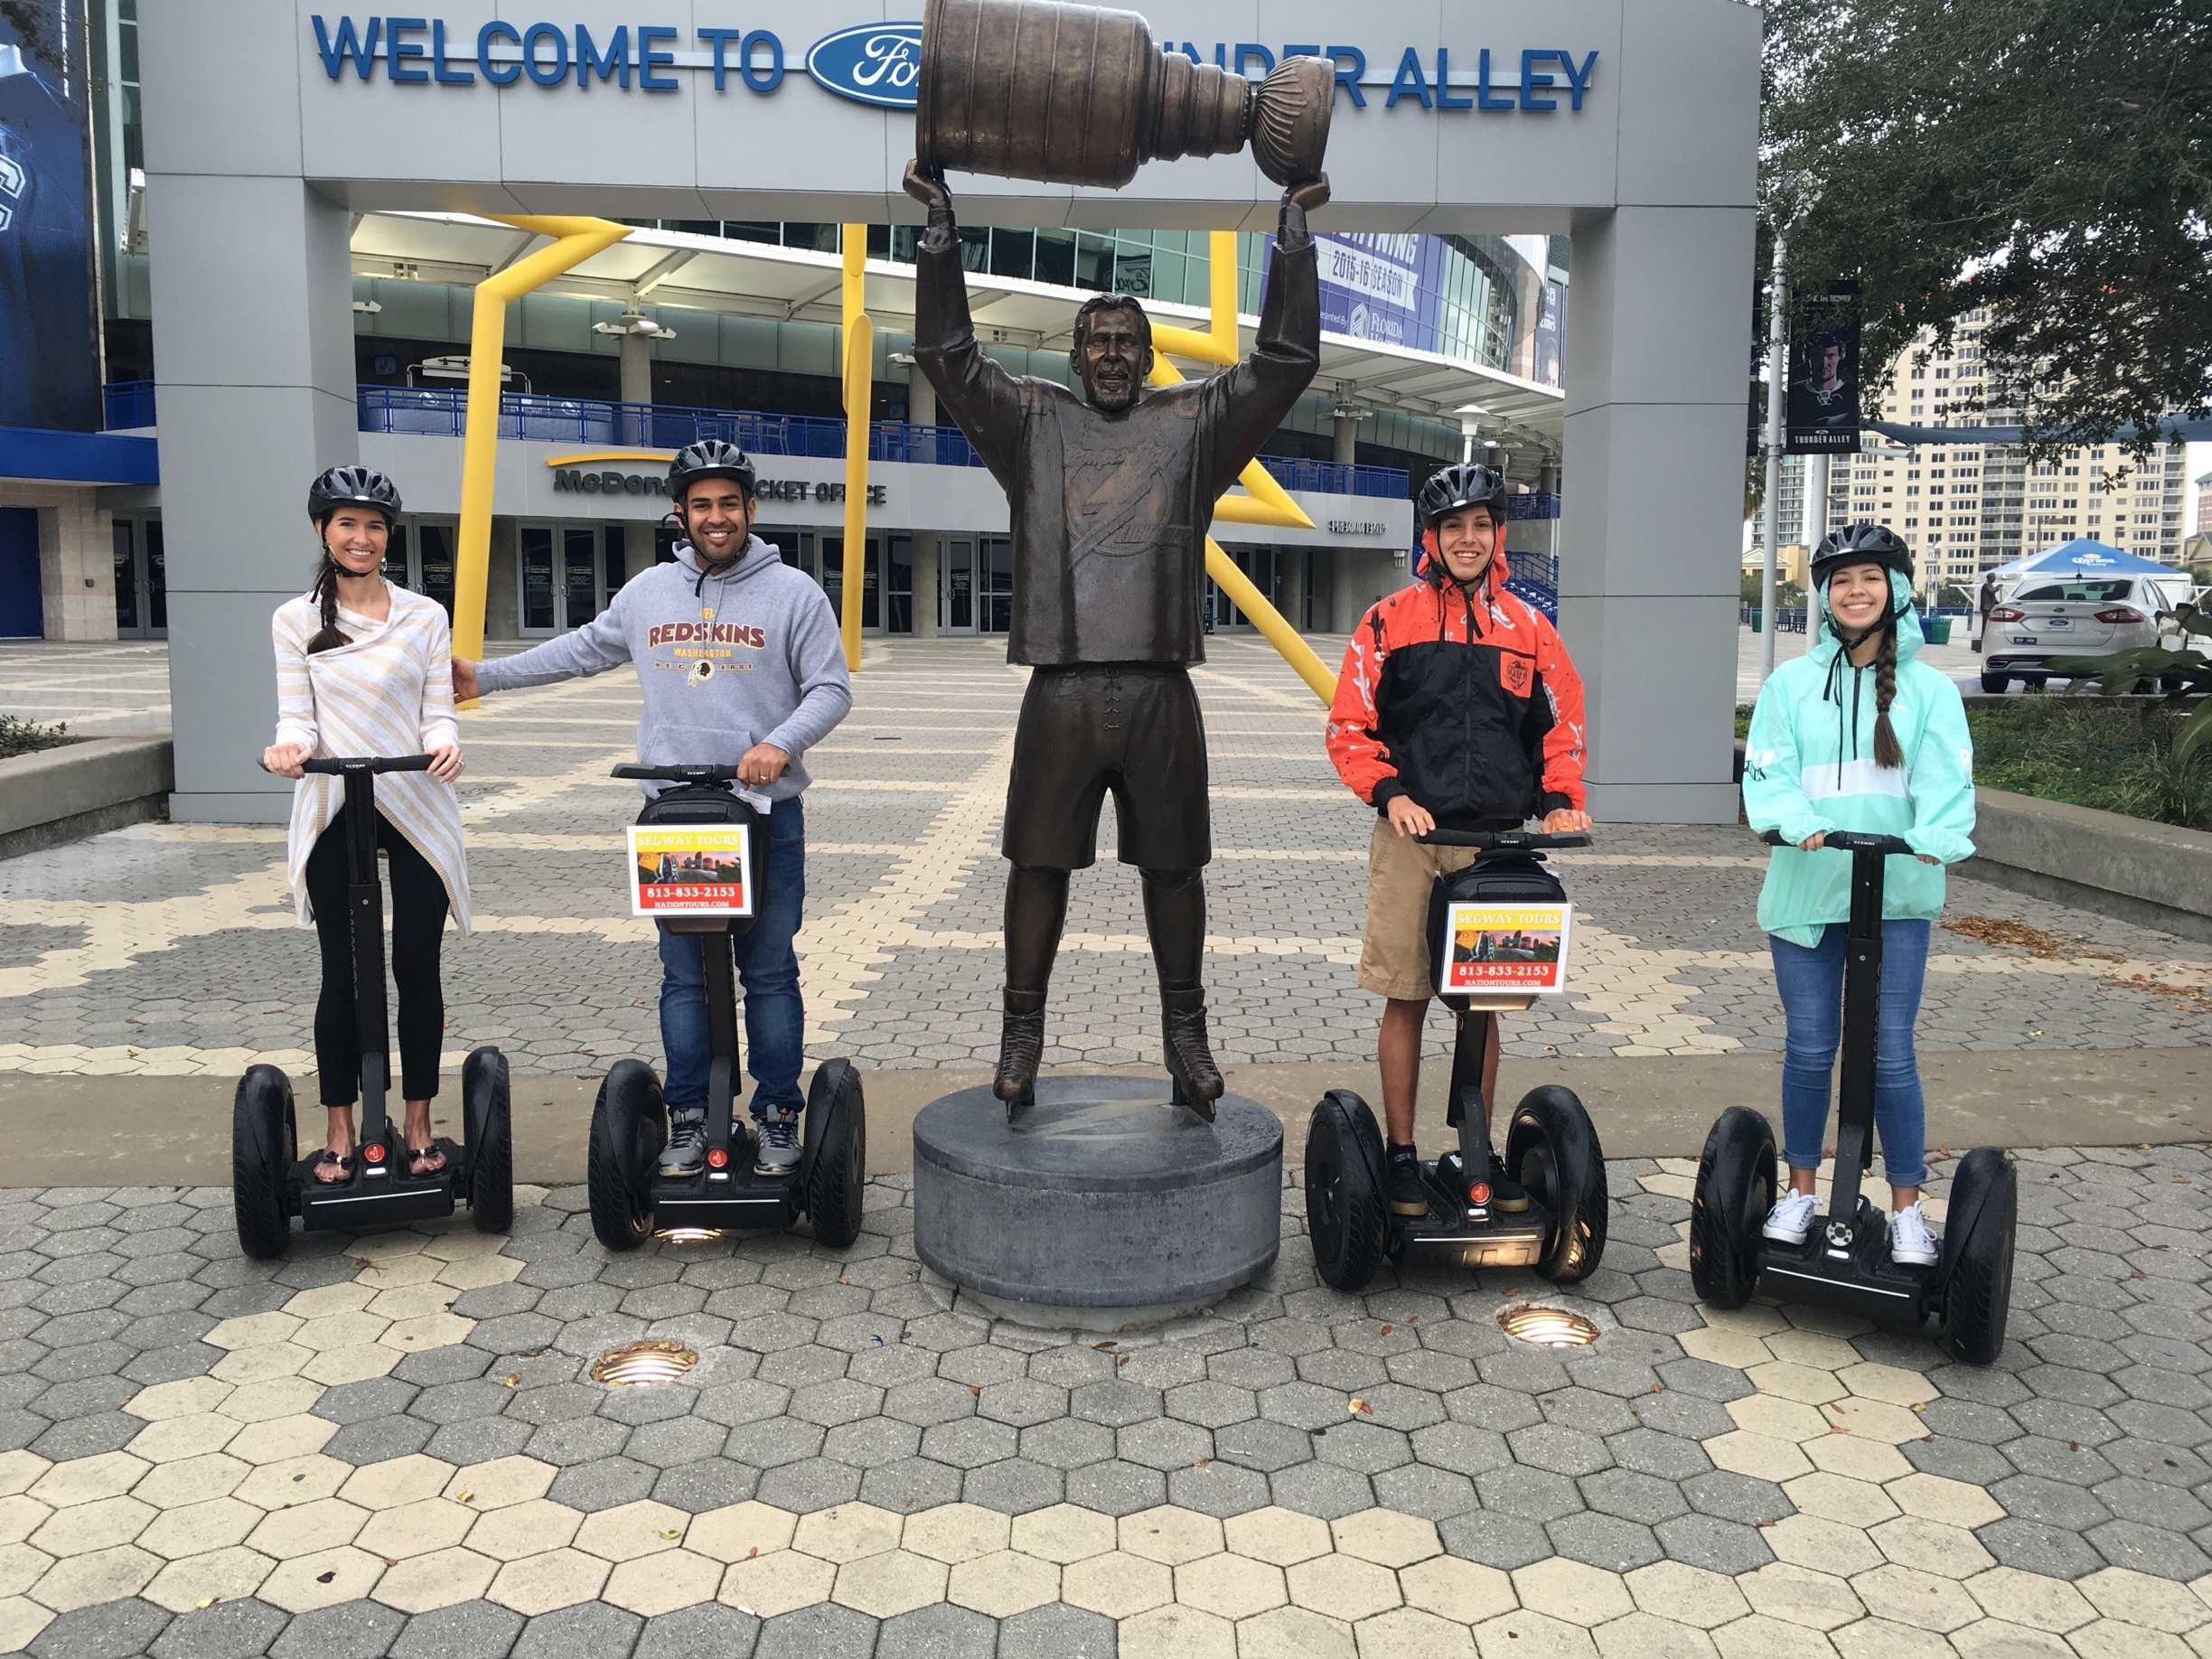 GO BOLTS!! Segwaying is also fun 